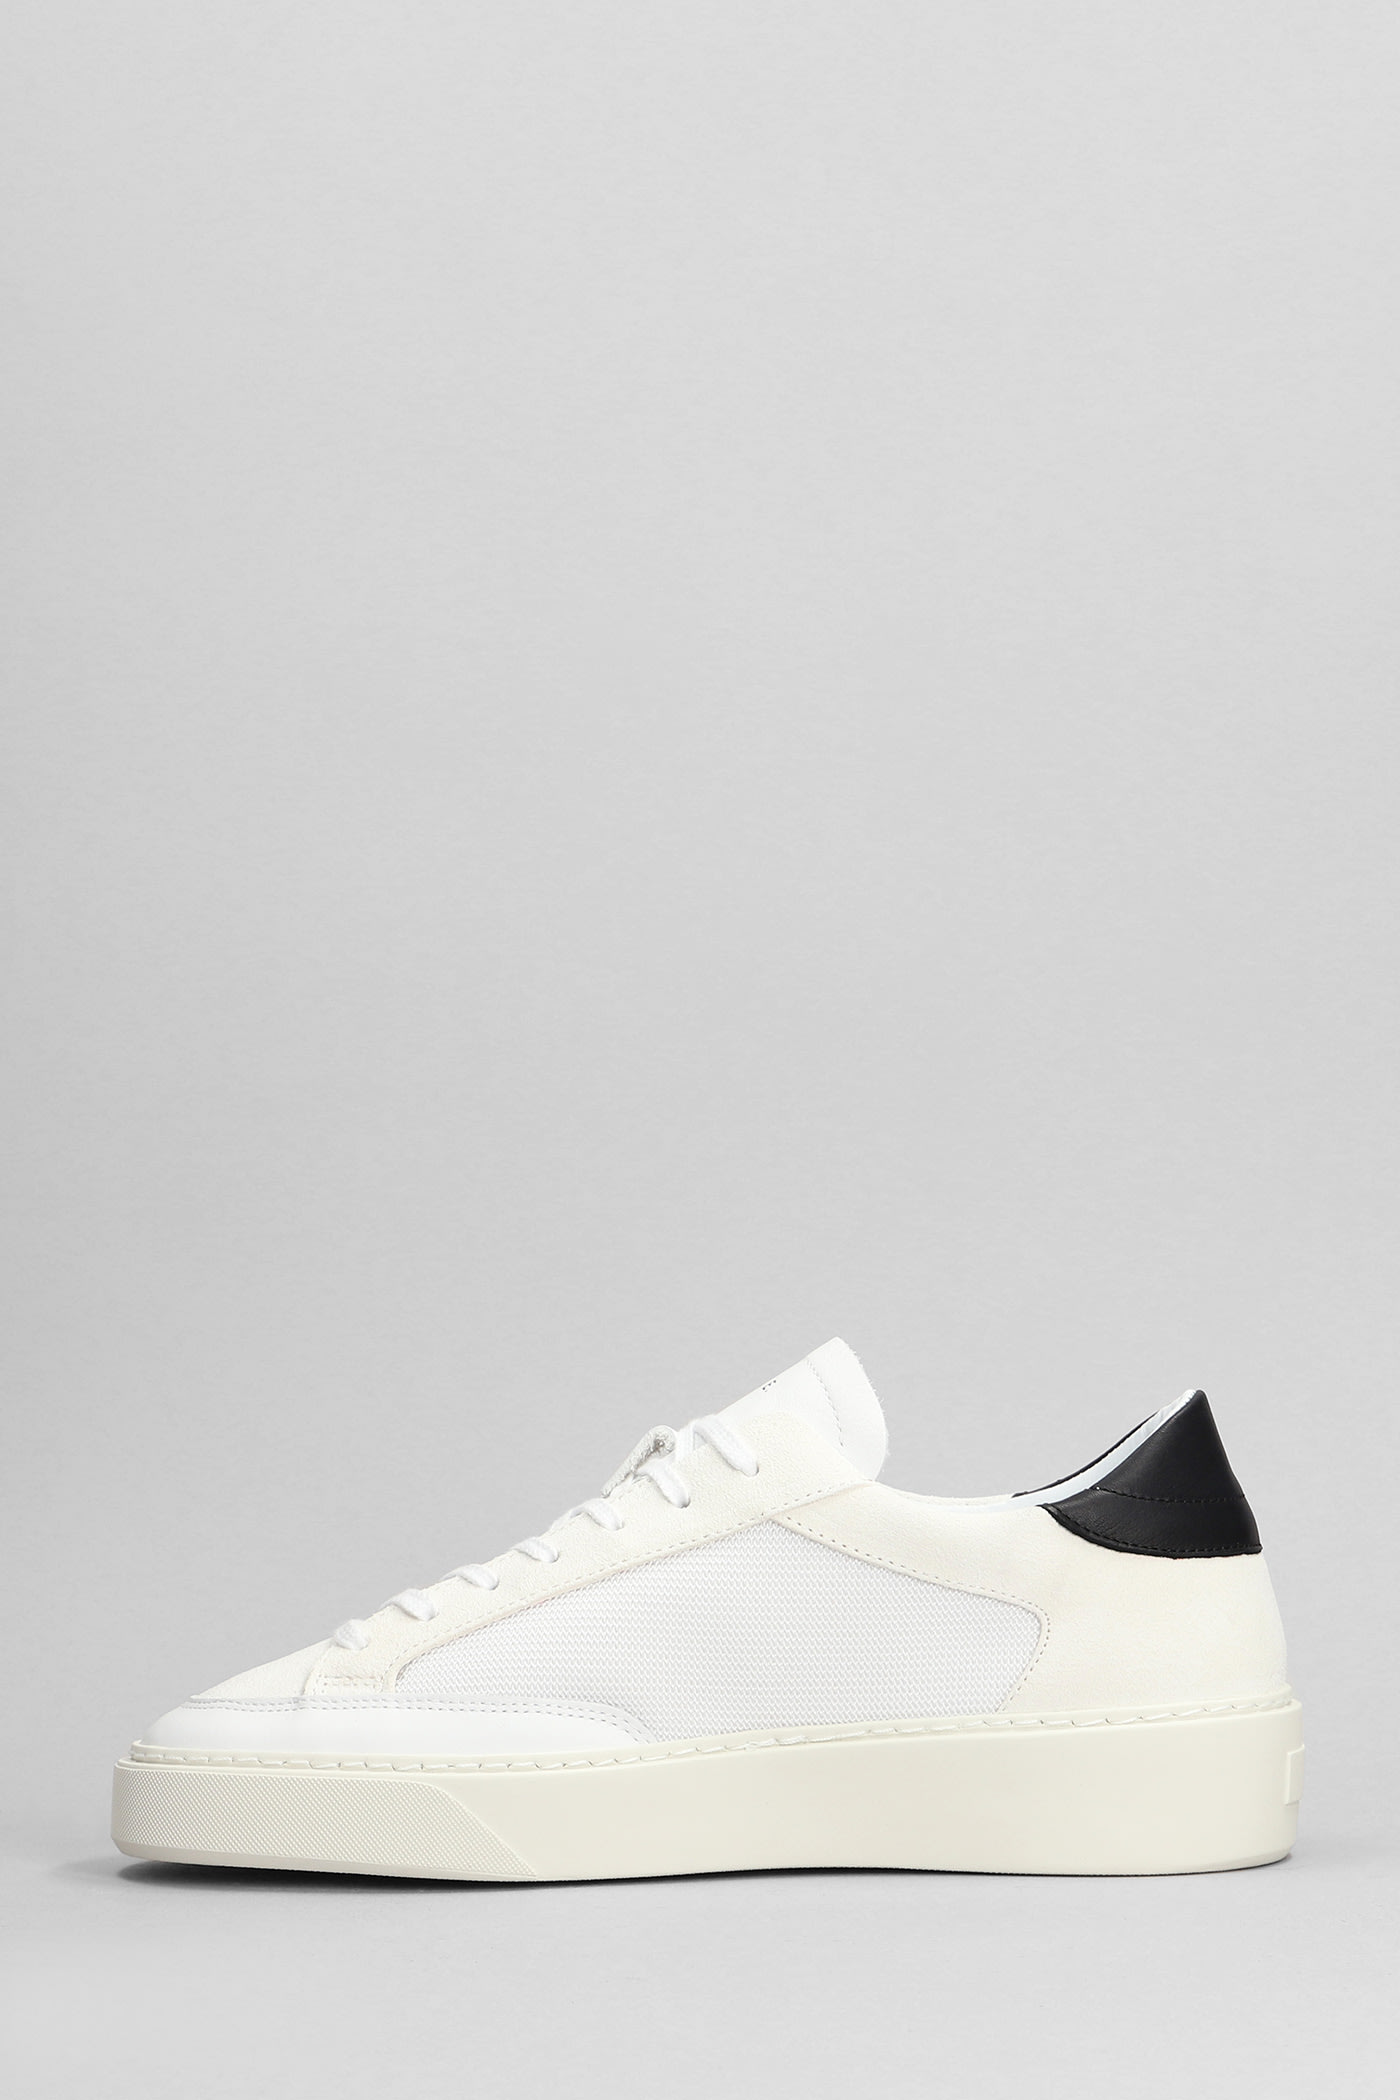 Shop Date Levante Dragon Sneakers In White Suede And Fabric